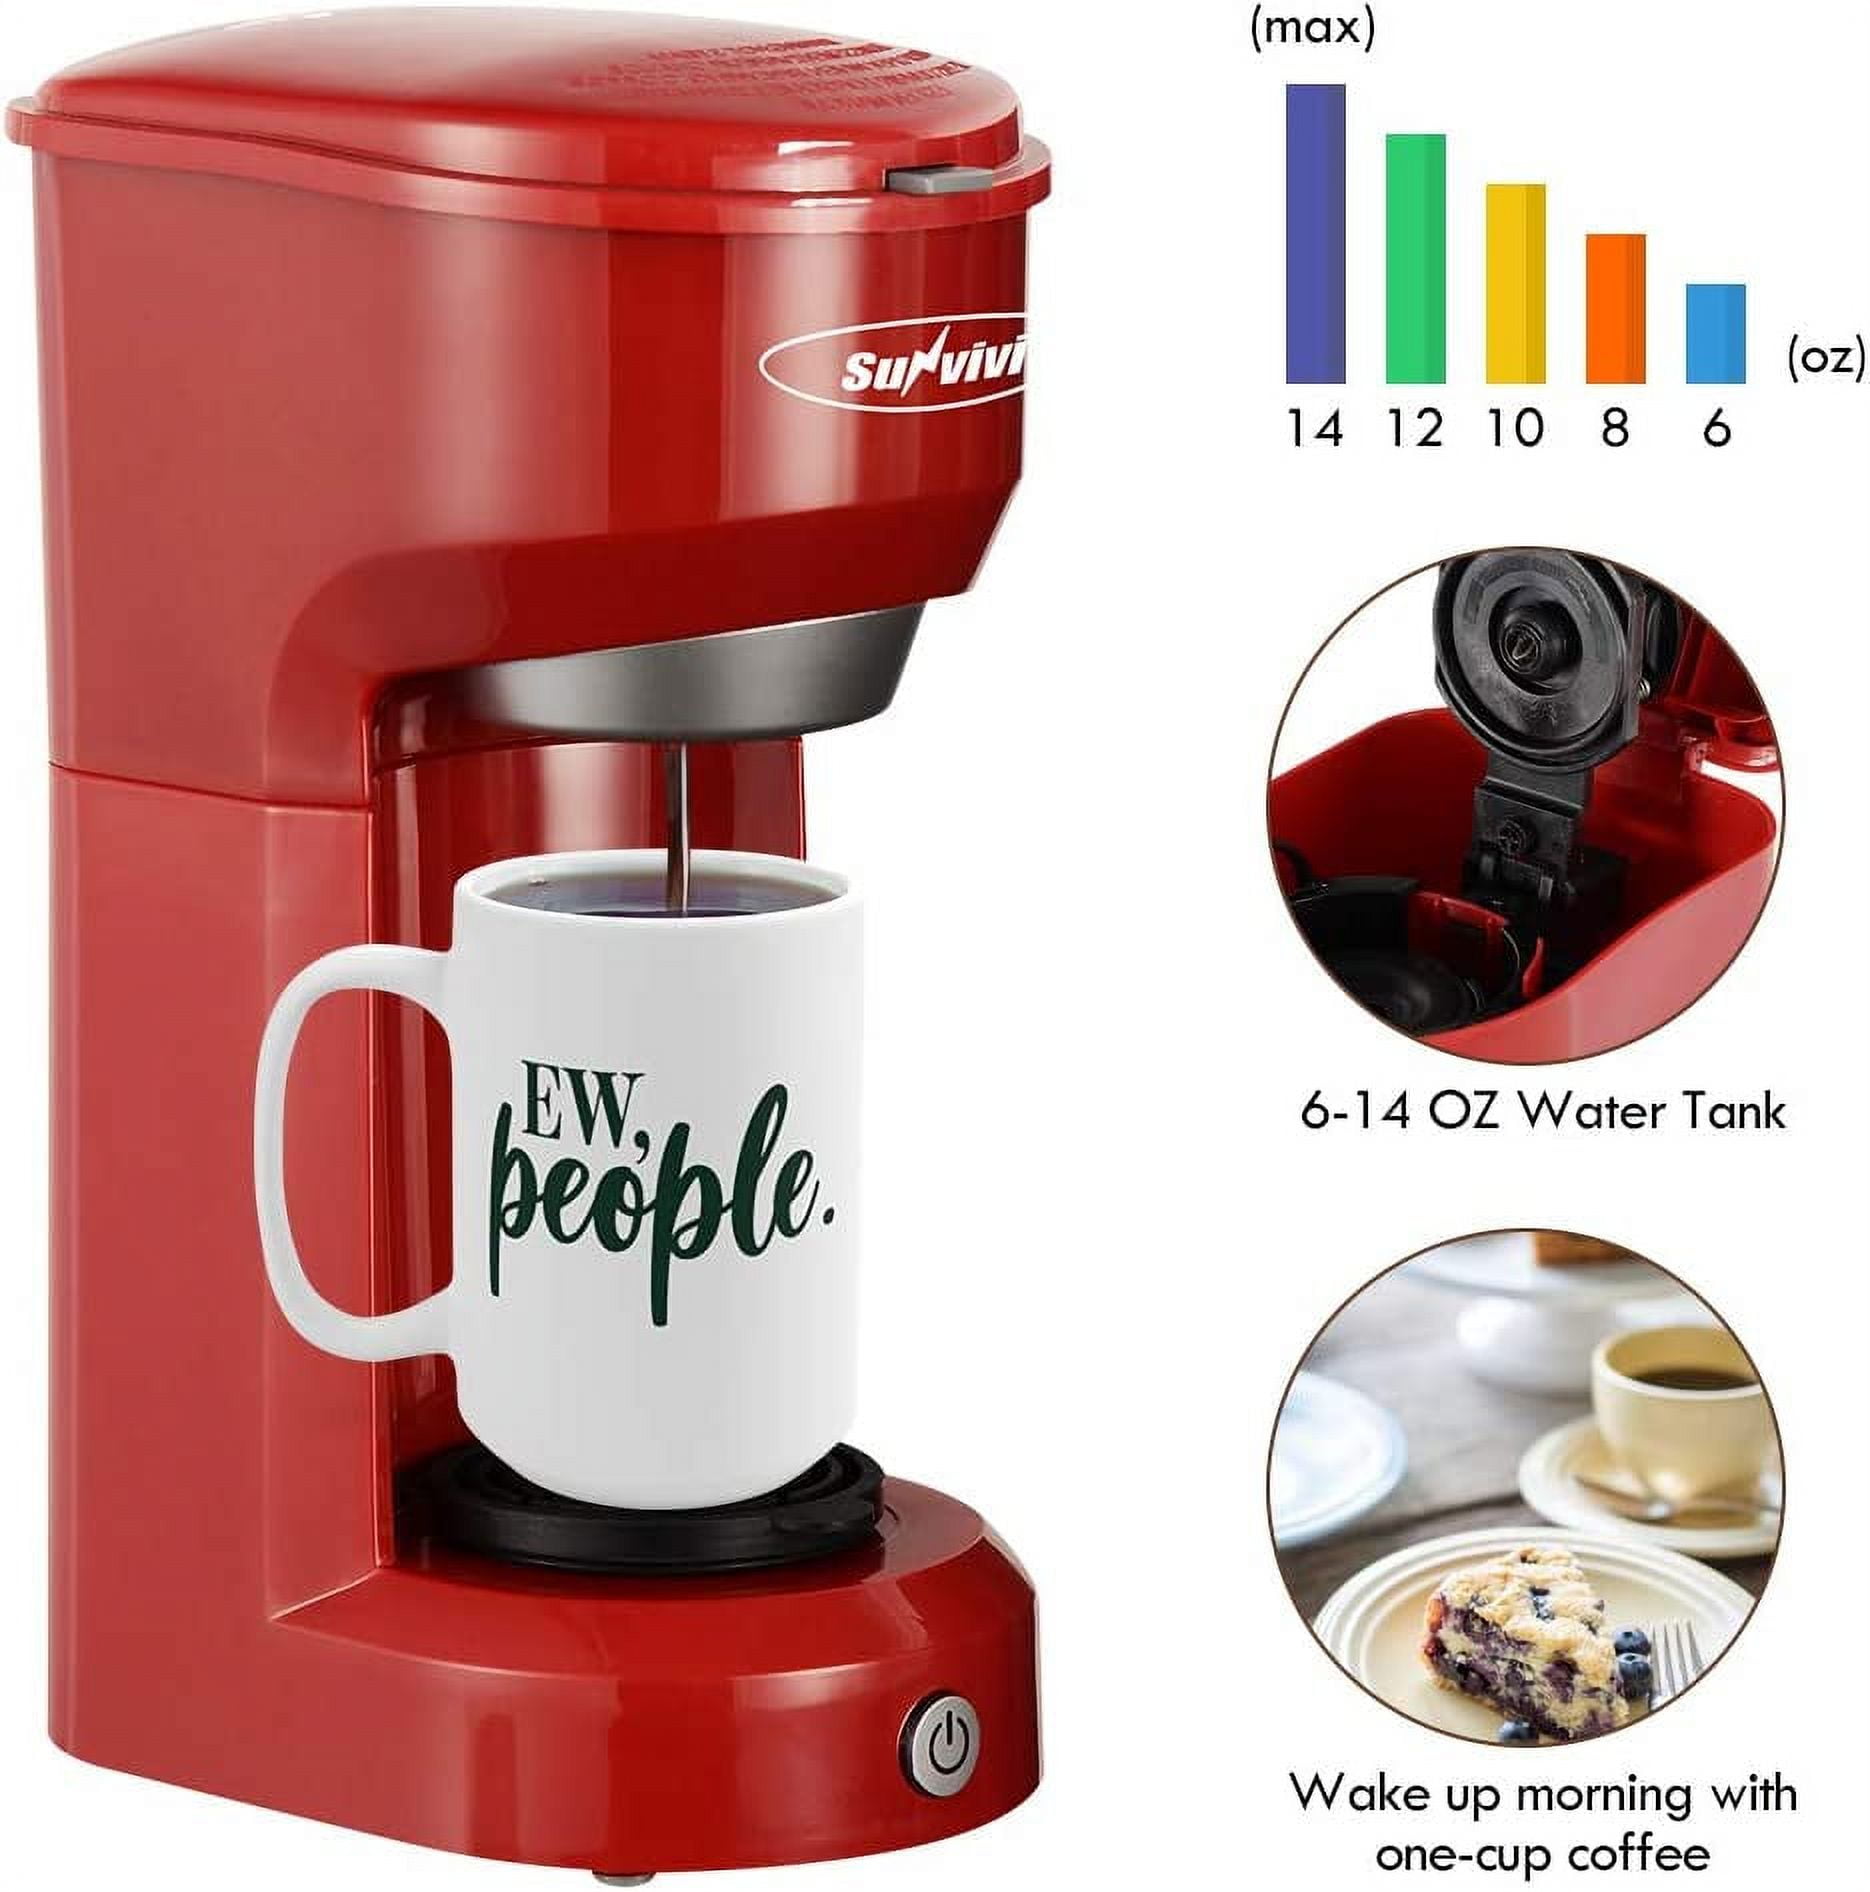 Coffee Maker, Single Serve Coffee Maker Machine 6 to 14 oz with Permanent Filter, Compatible with K Cup Pod & Ground Coffee, Red, Size: 10.9 x 6.6 x